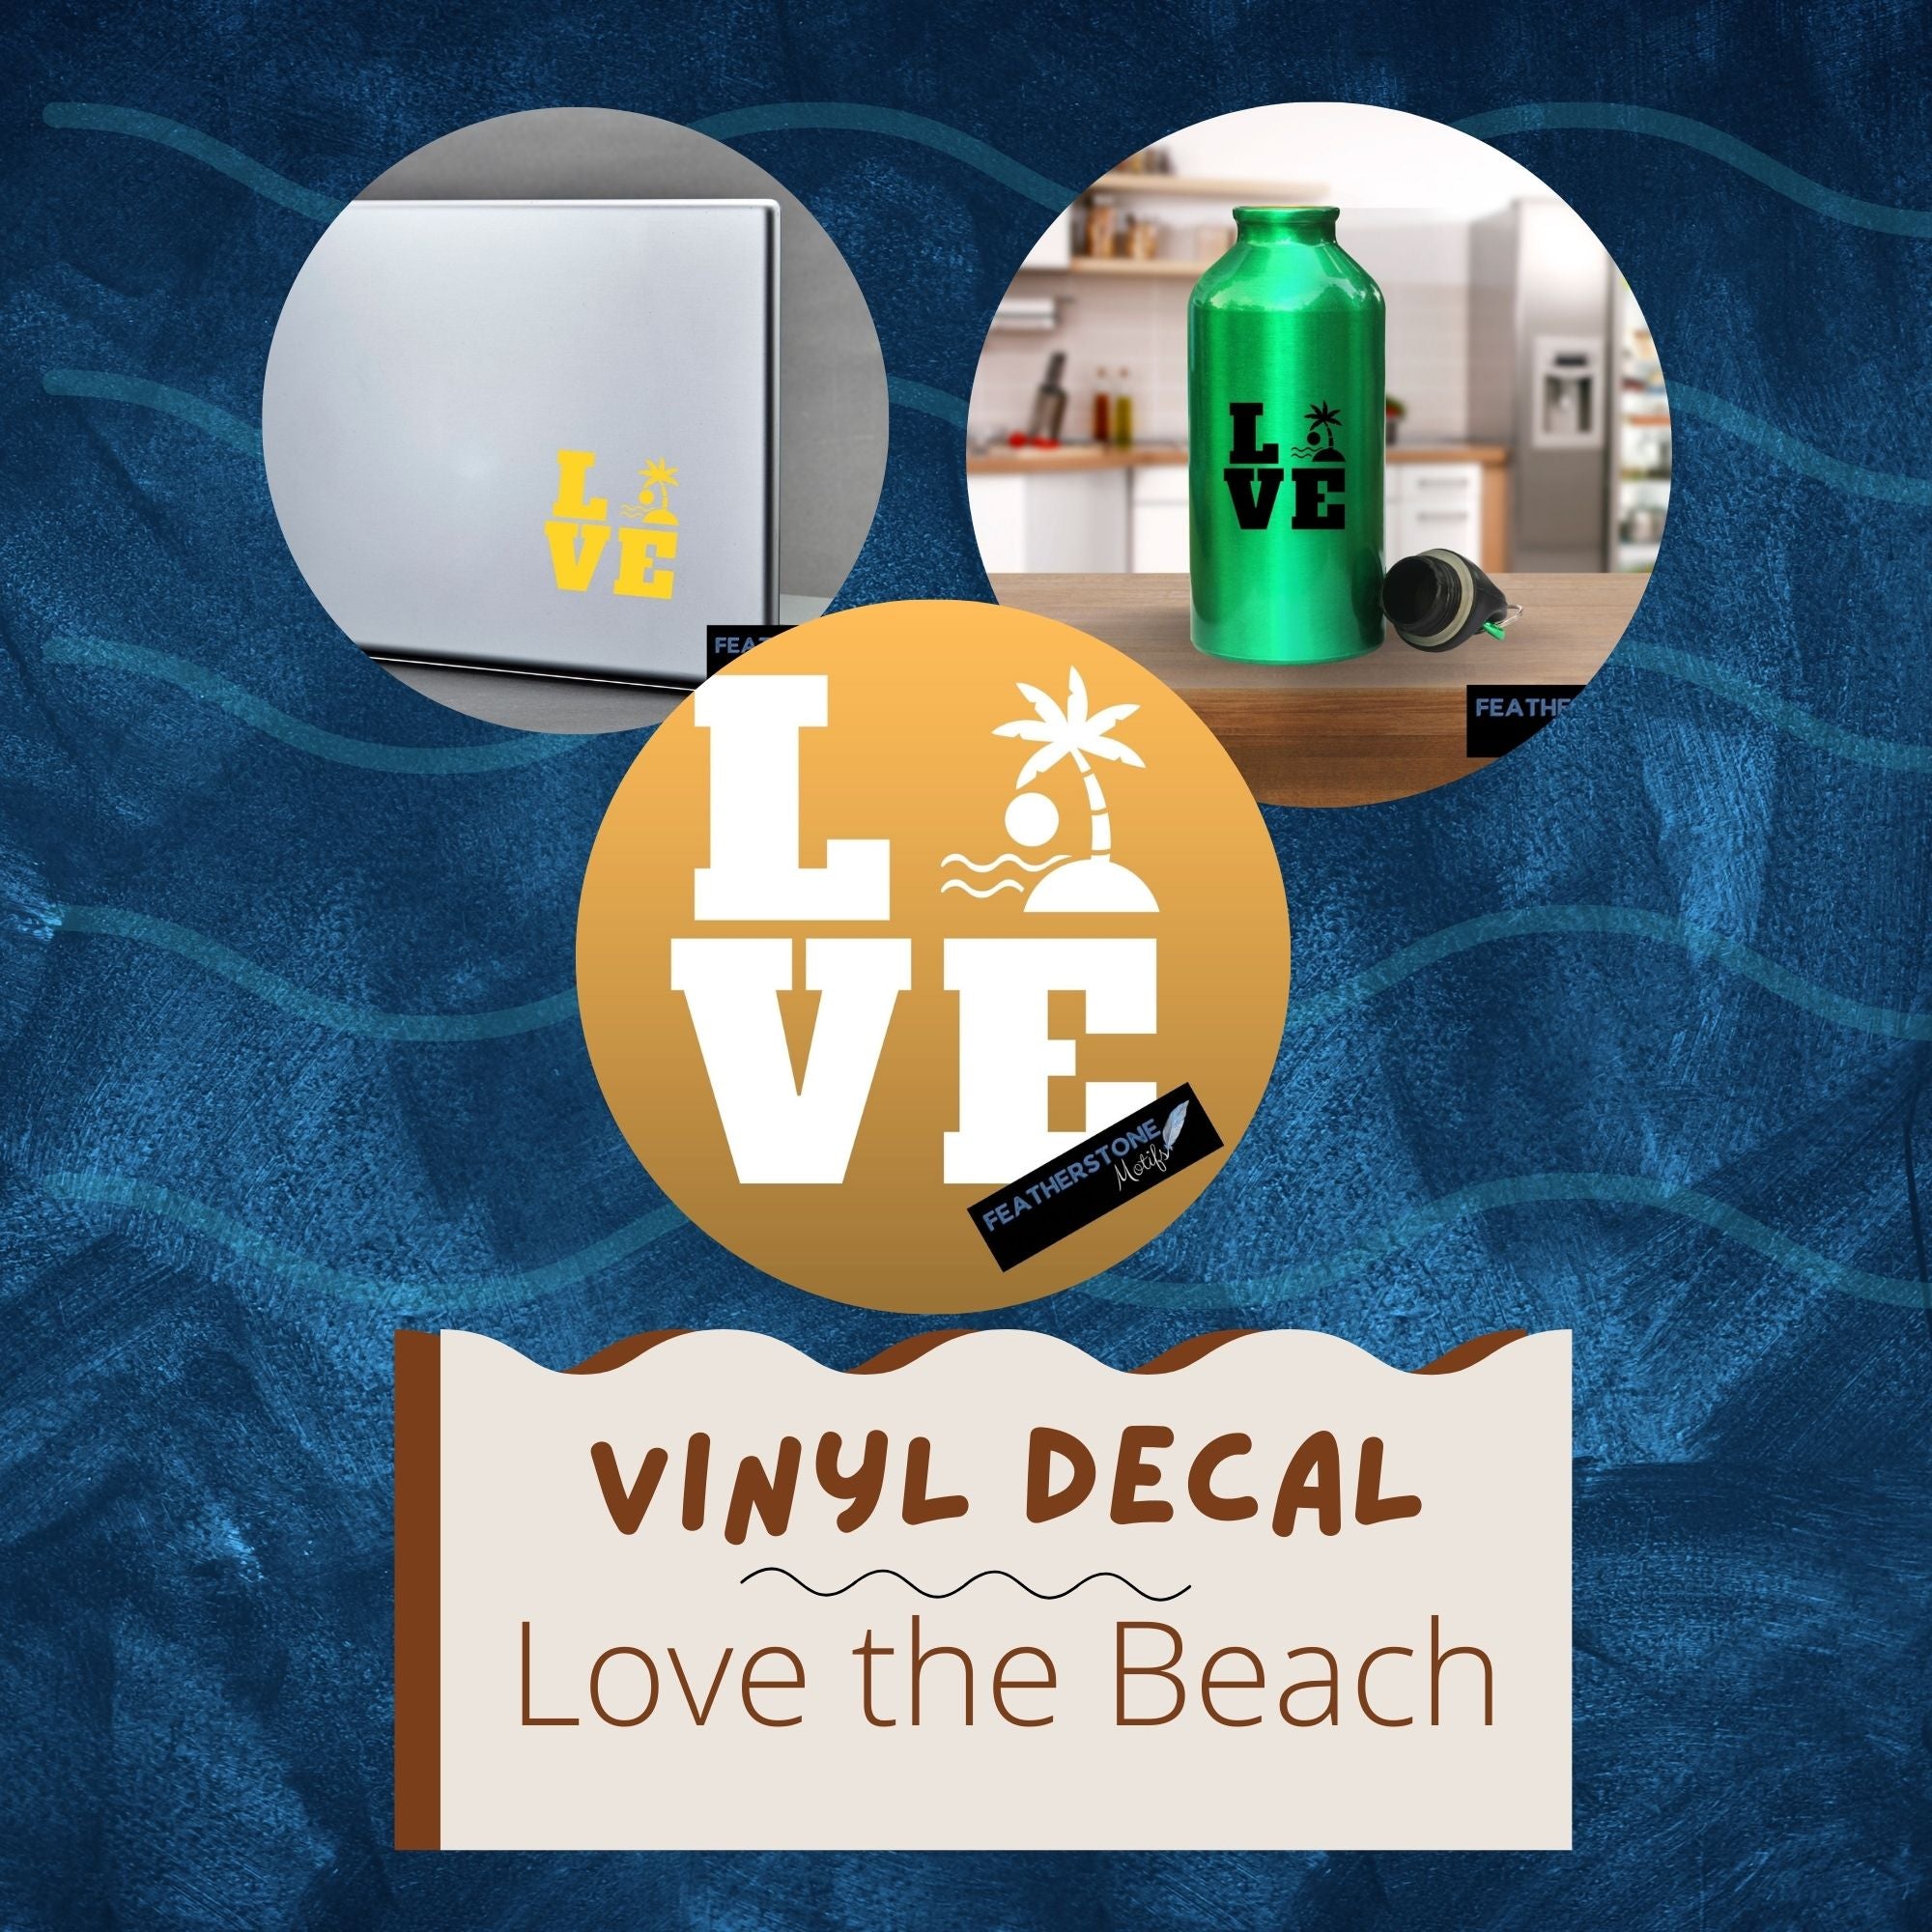 Love the beach? Then show it with this beach themed love square vinyl decal! Available in 4 sizes and 10 colors, these vinyl decals make great gifts for everyone. This image is the cover page.